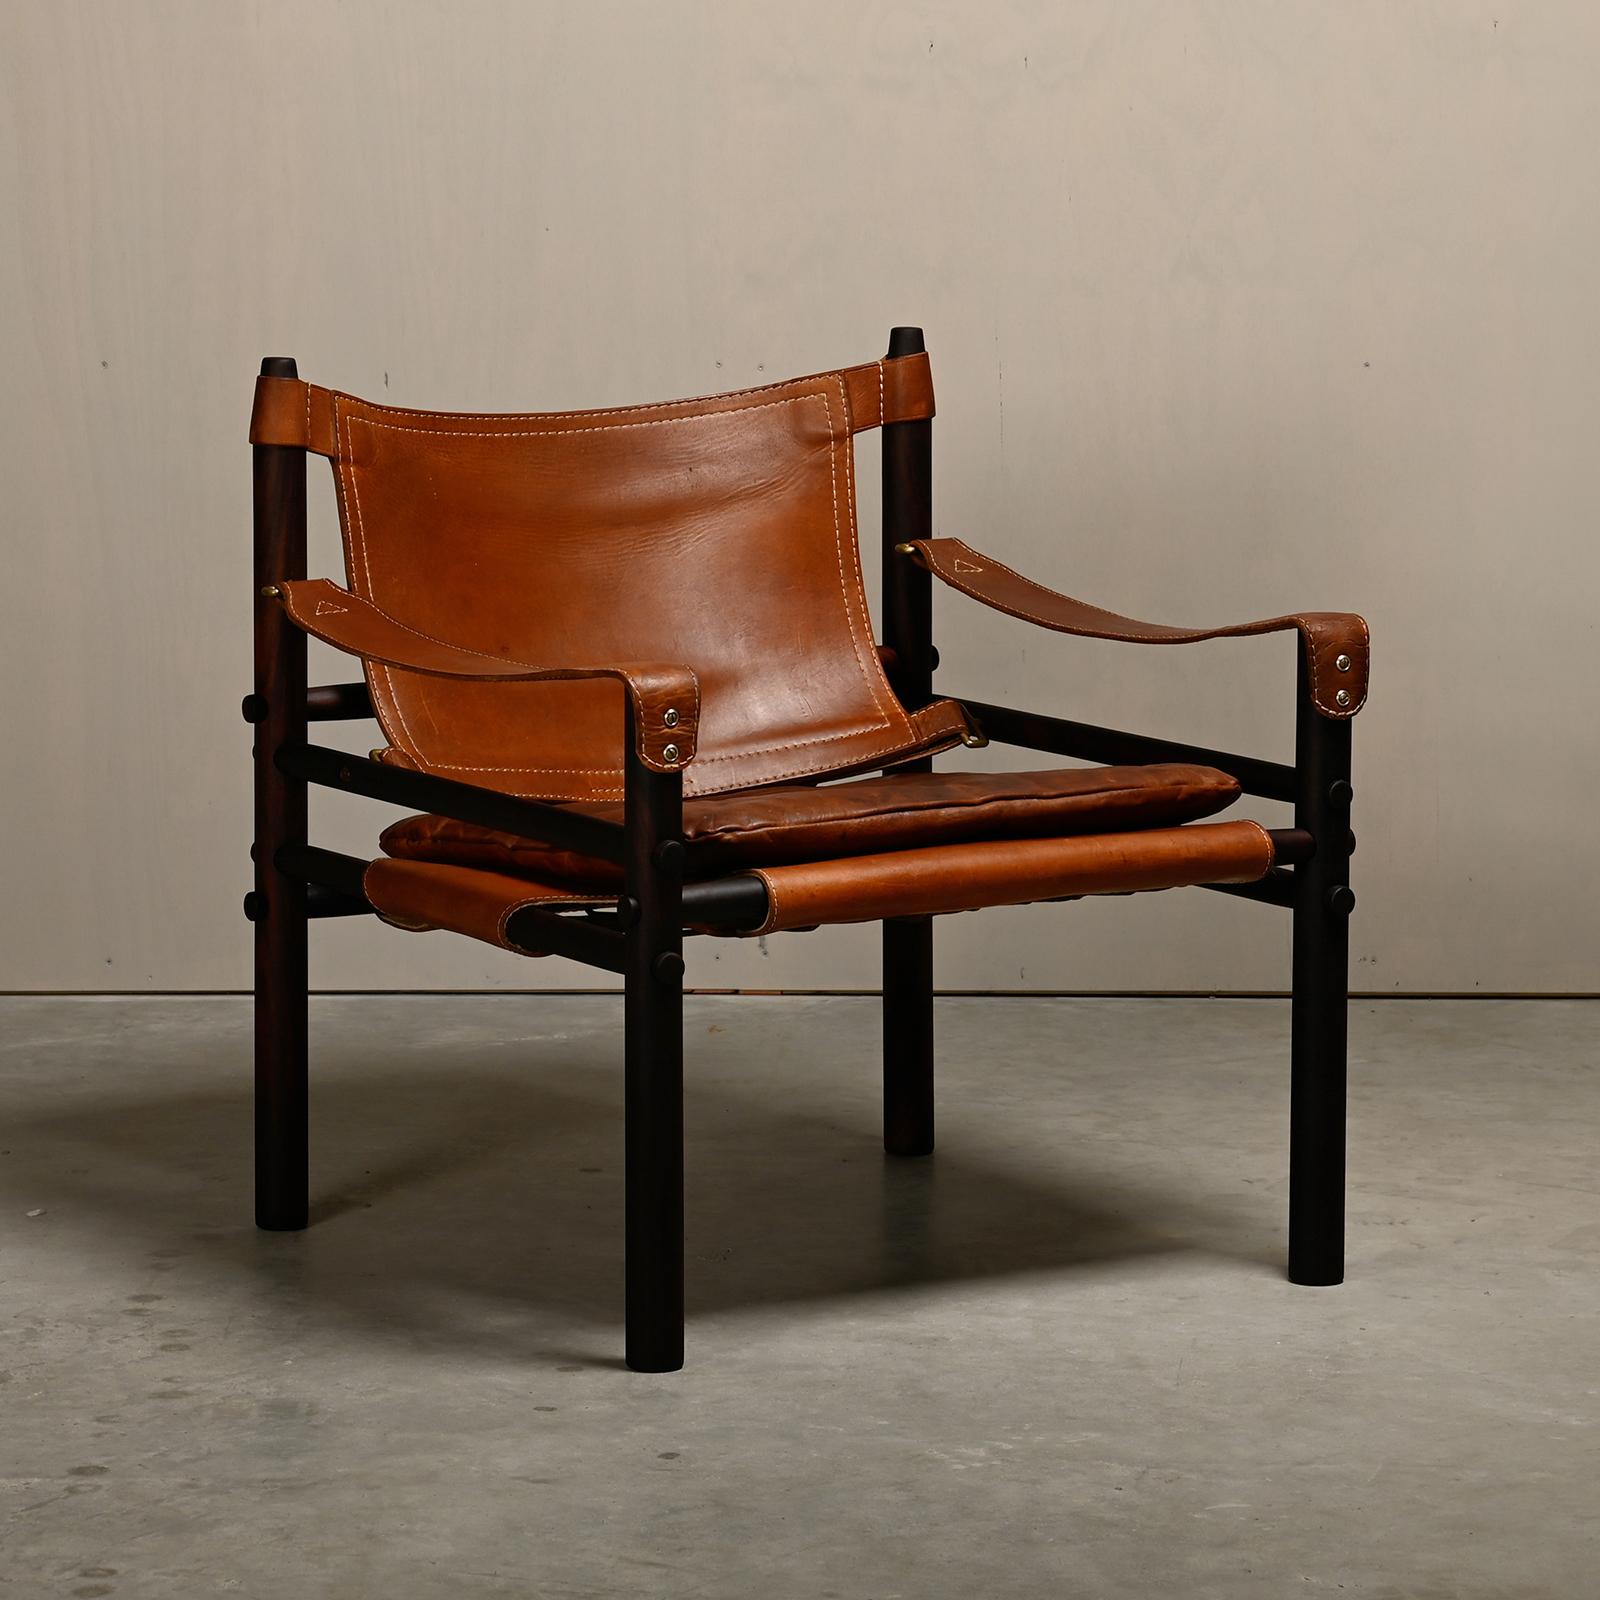 Swedish Arne Norell Sirocco Safari Lounge Chair in dark brown wood and leather, Sweden